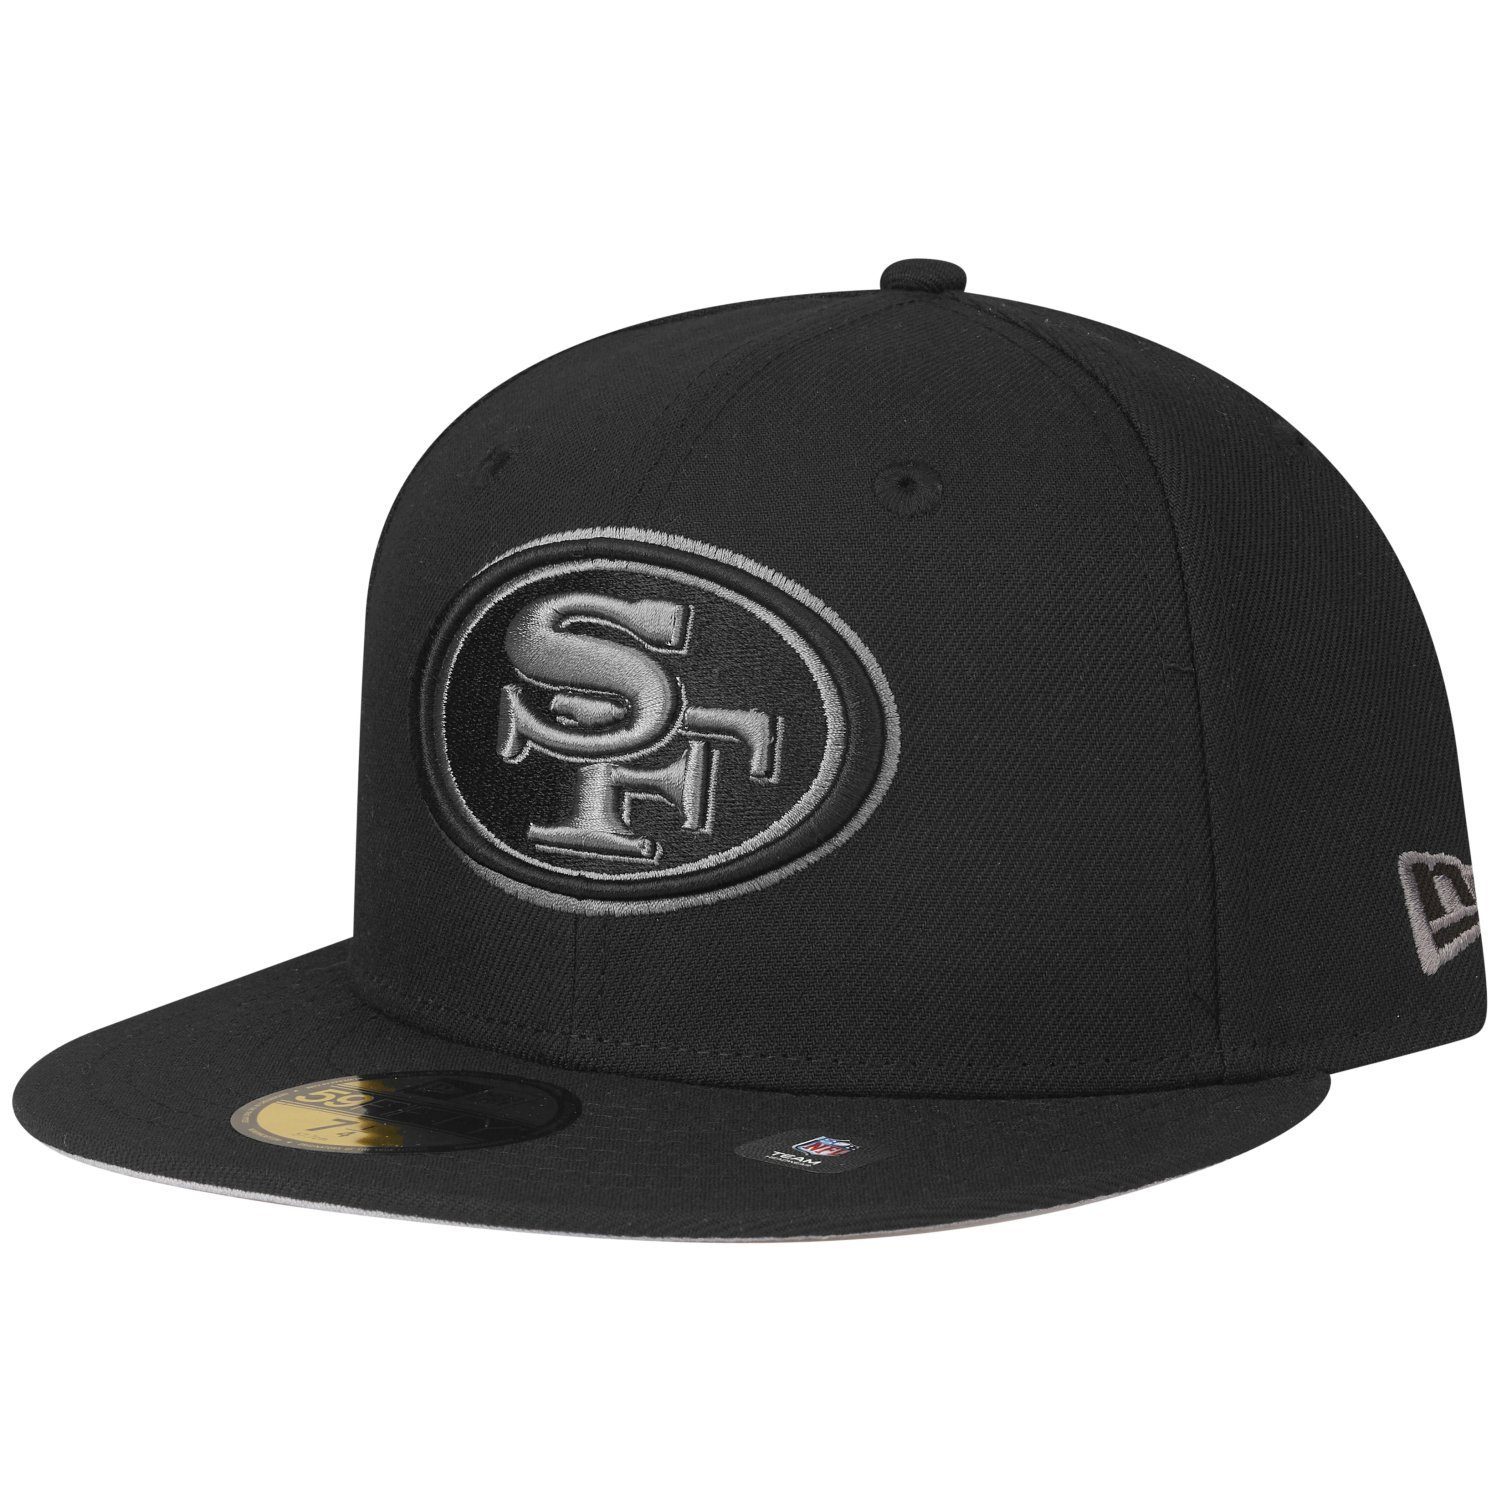 New Era Fitted Cap 59Fifty NFL TEAMS San Francisco 49ers